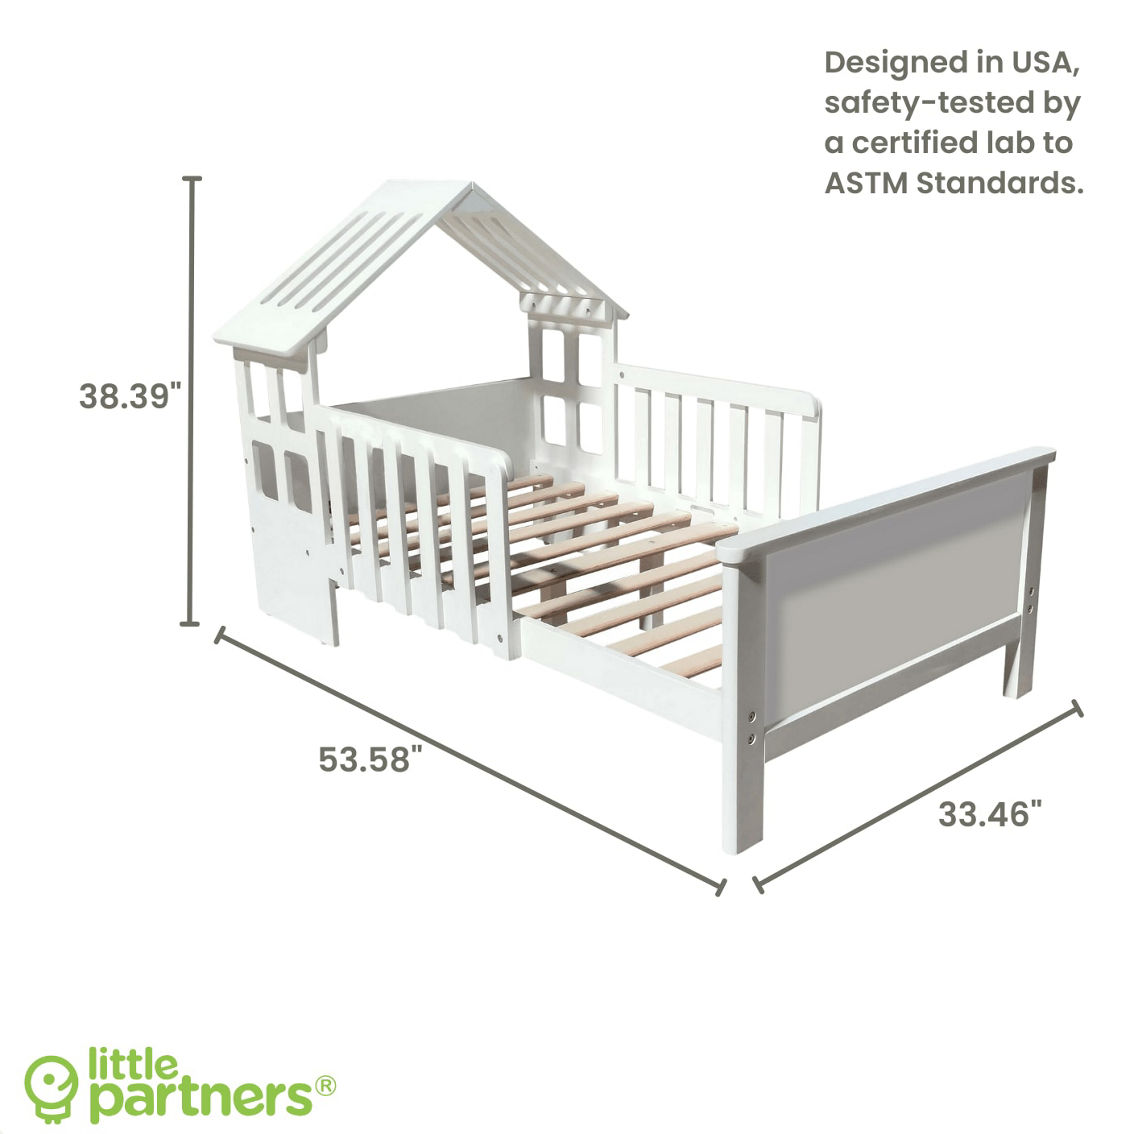 Little Partners Lil House Toddler Bed - Image 5 of 5